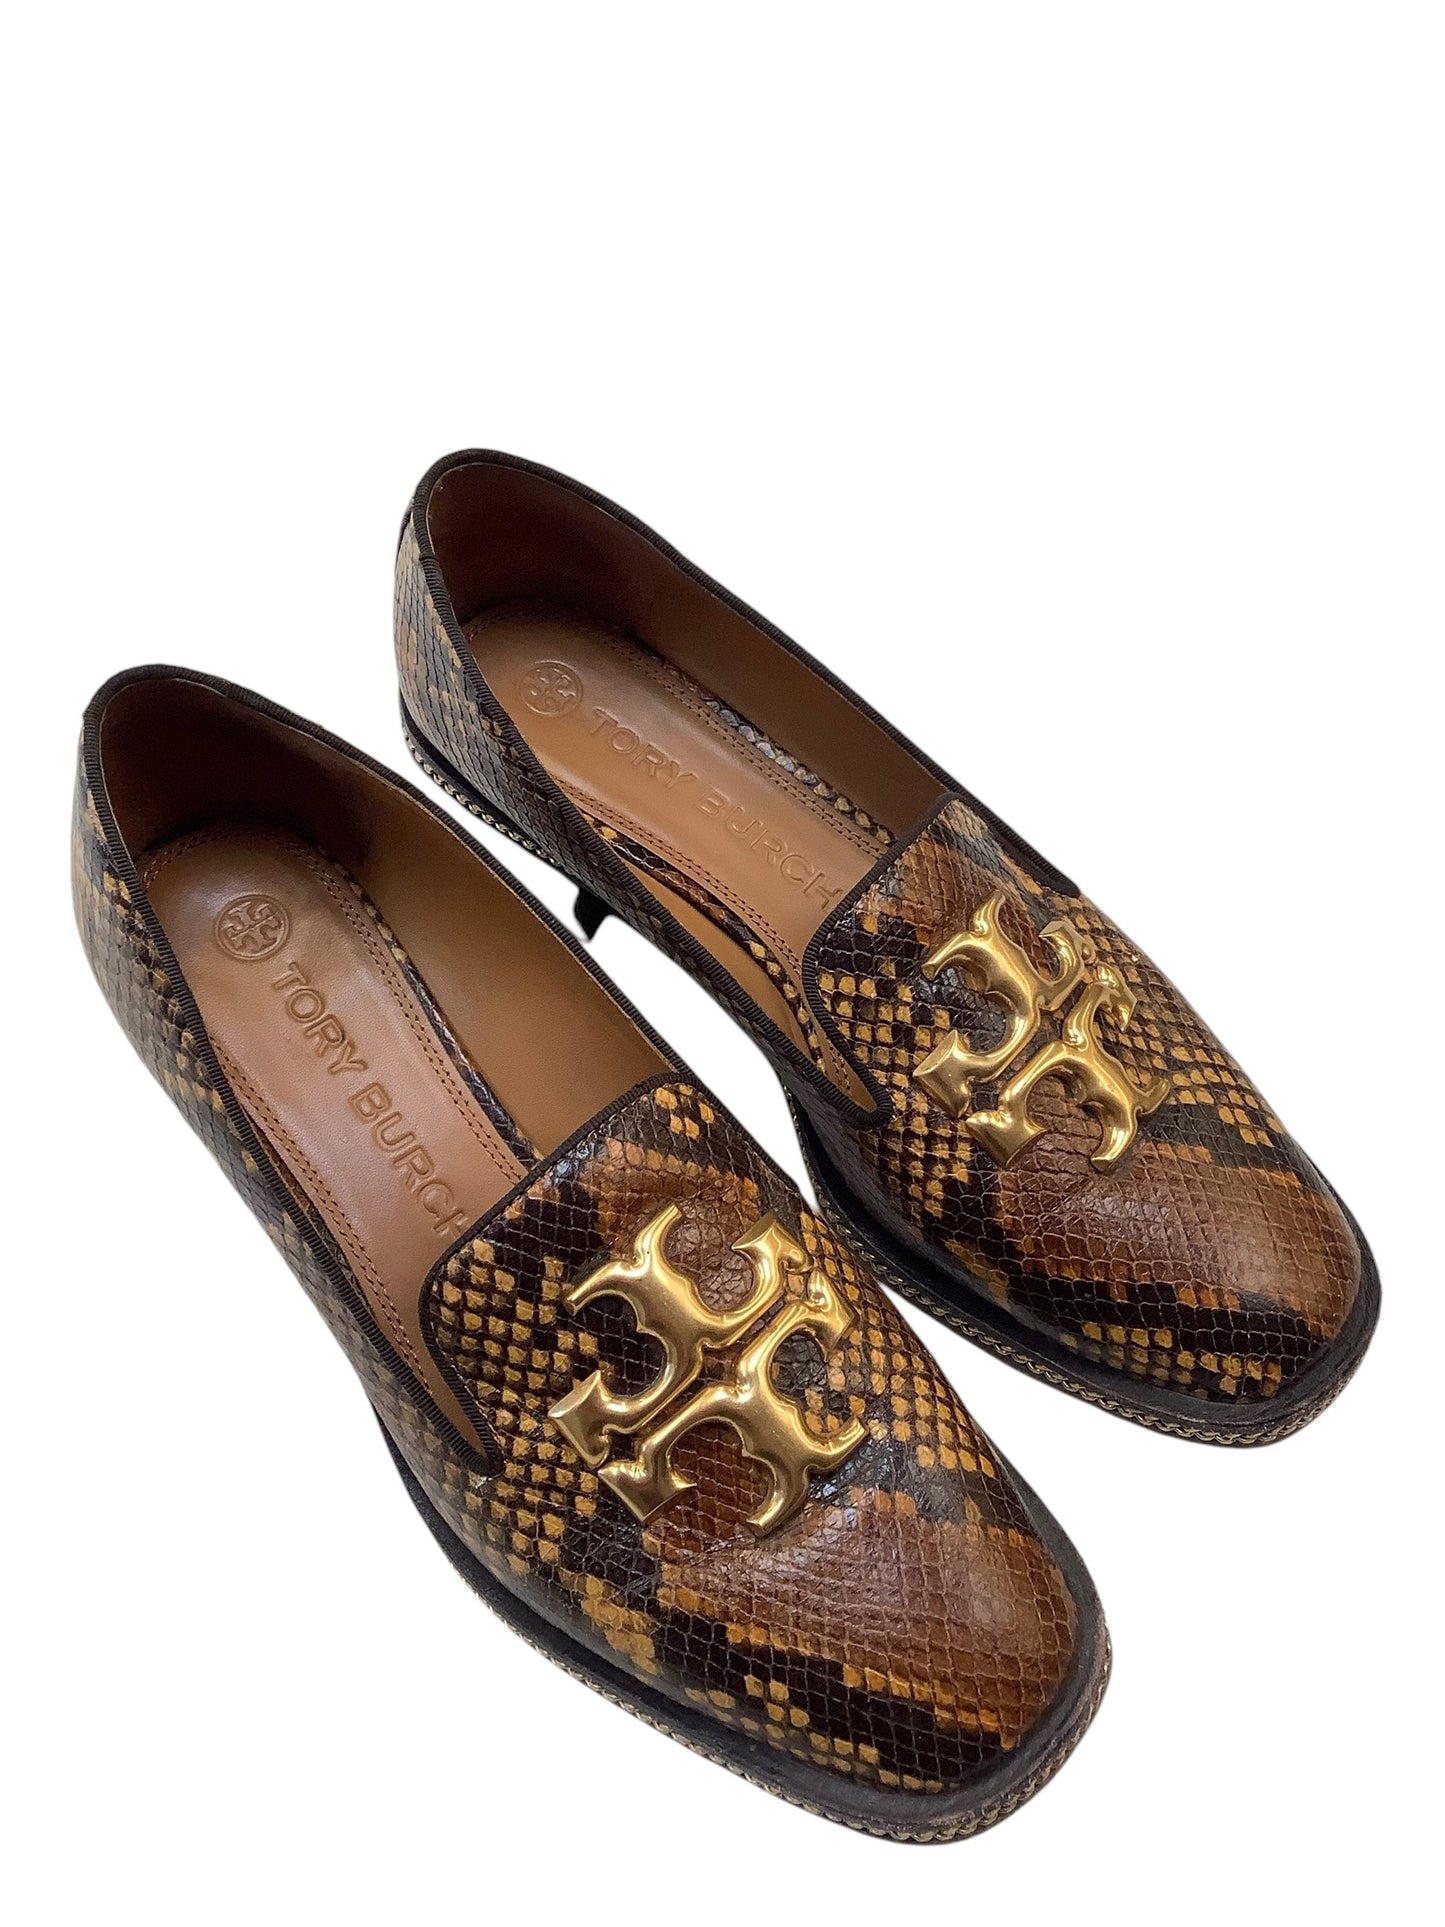 Shoes Designer By Tory Burch  Size: 8.5